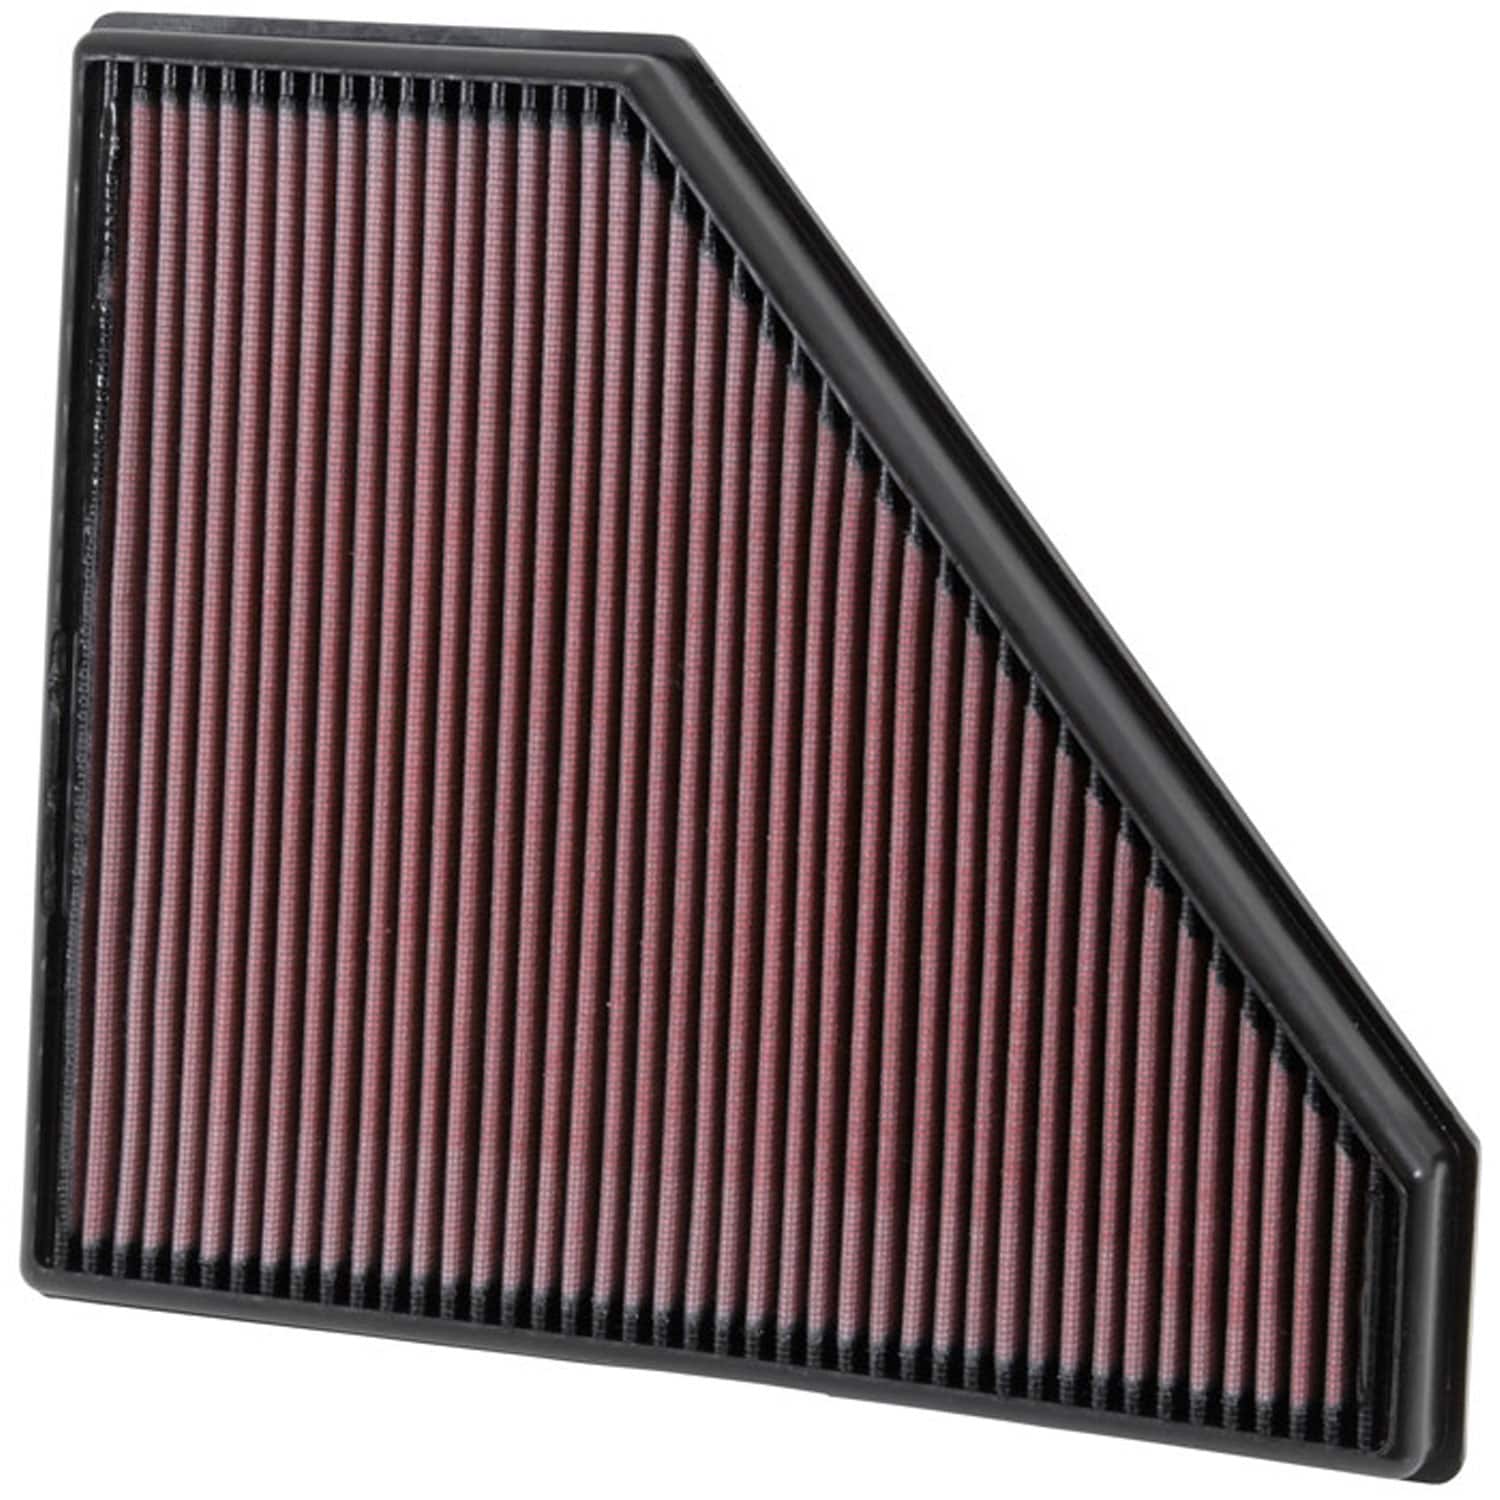 K&N Engine Air Filter: Reusable, Clean Every 75,000 Miles, Washable,  Replacement Car Air Filter: Compatible with 2003-2019  Volswagen/Audi/Seat/Skoda